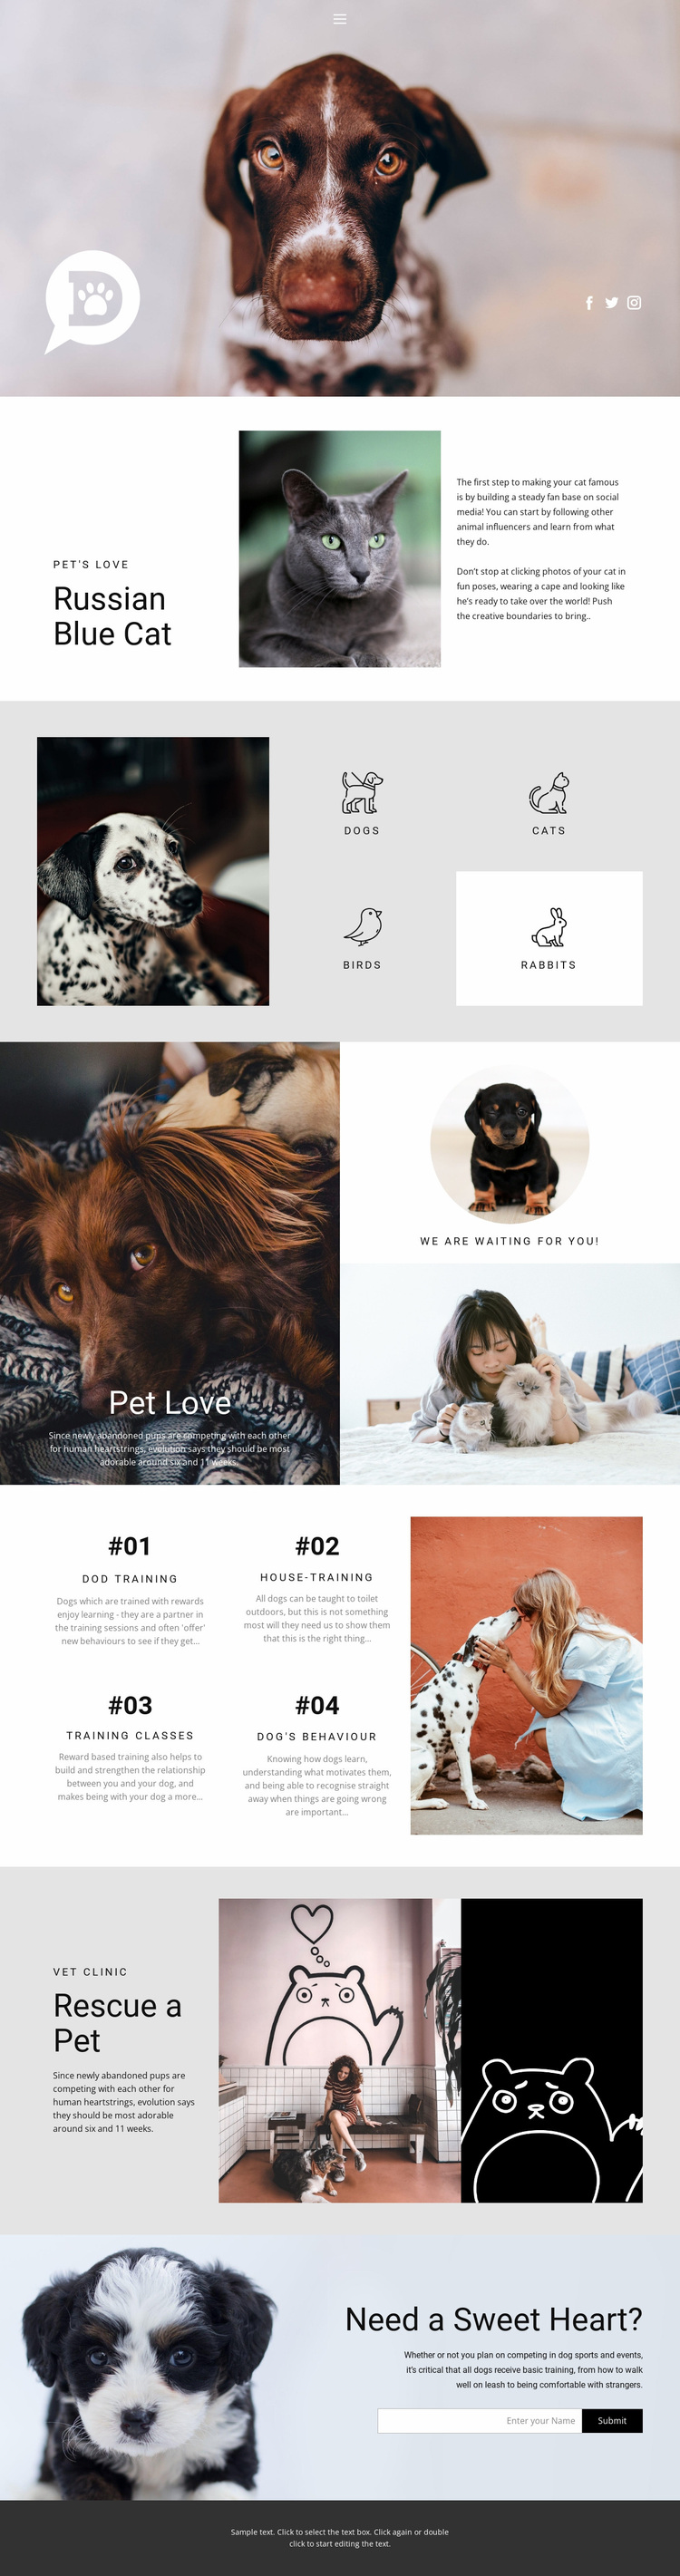 Care for pets and animals Website Design